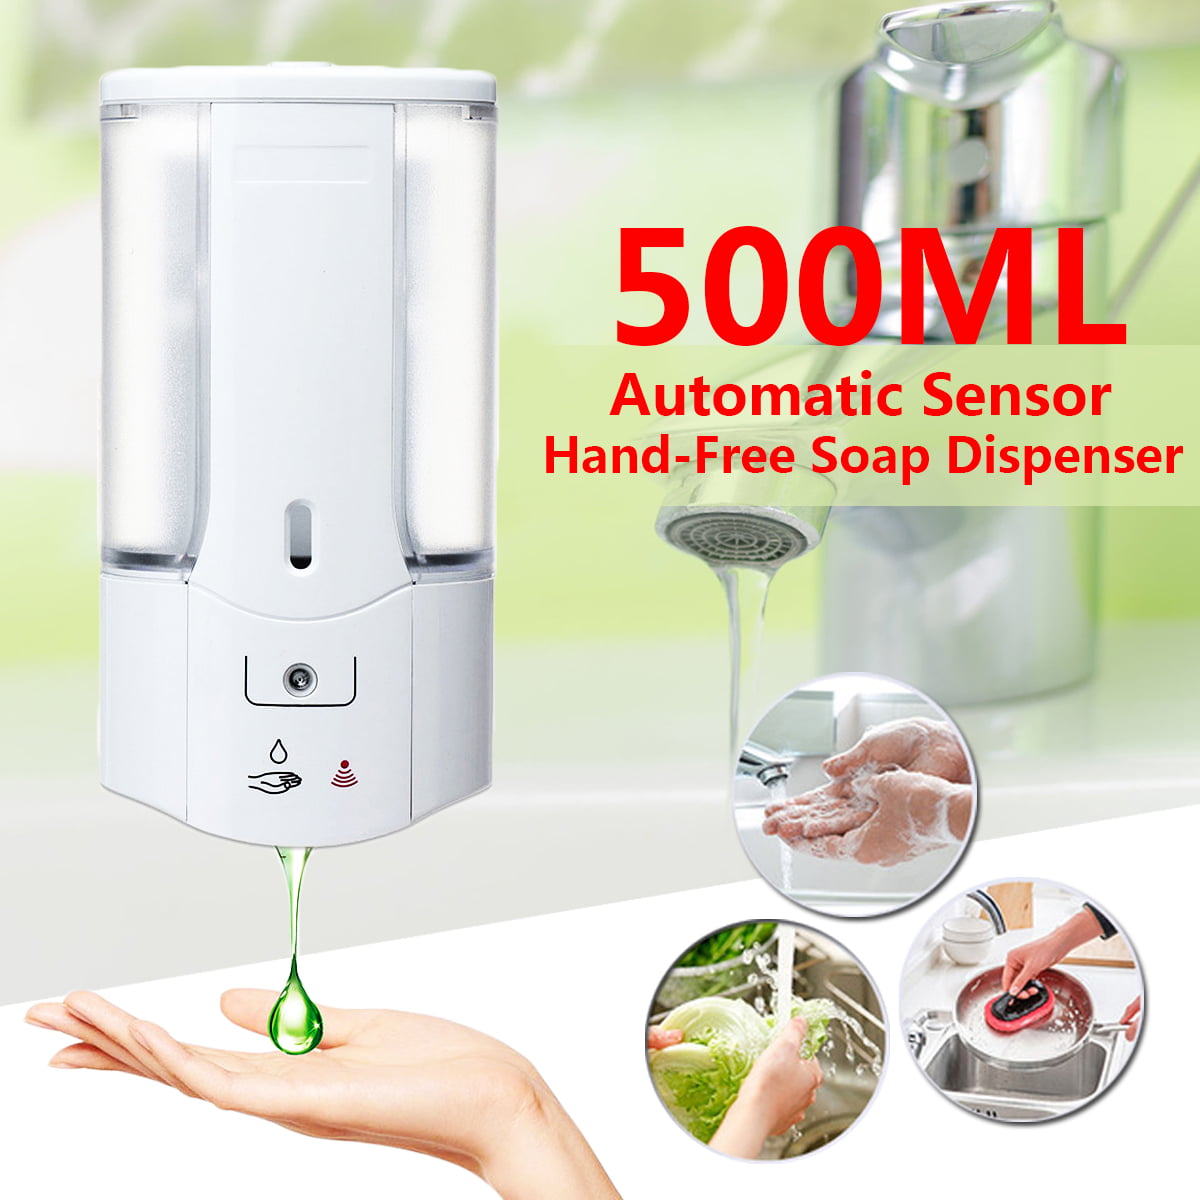 500mL Wall Mounted Automatic Soap Dispenser, Hand-Free Infrared Motion